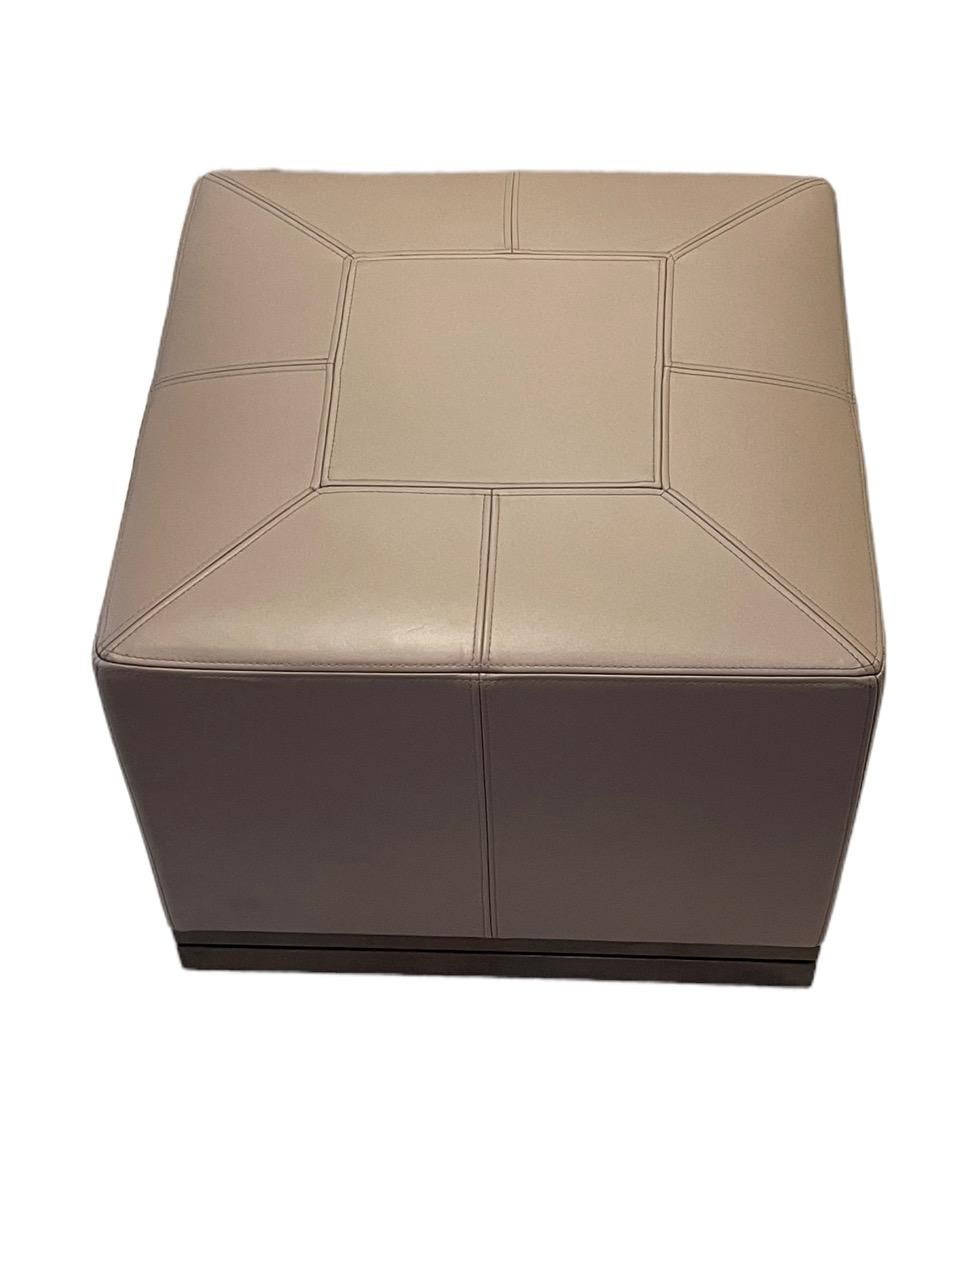 Bronze Custom Holly Hunt Archipelago Ottoman in Taupe Color